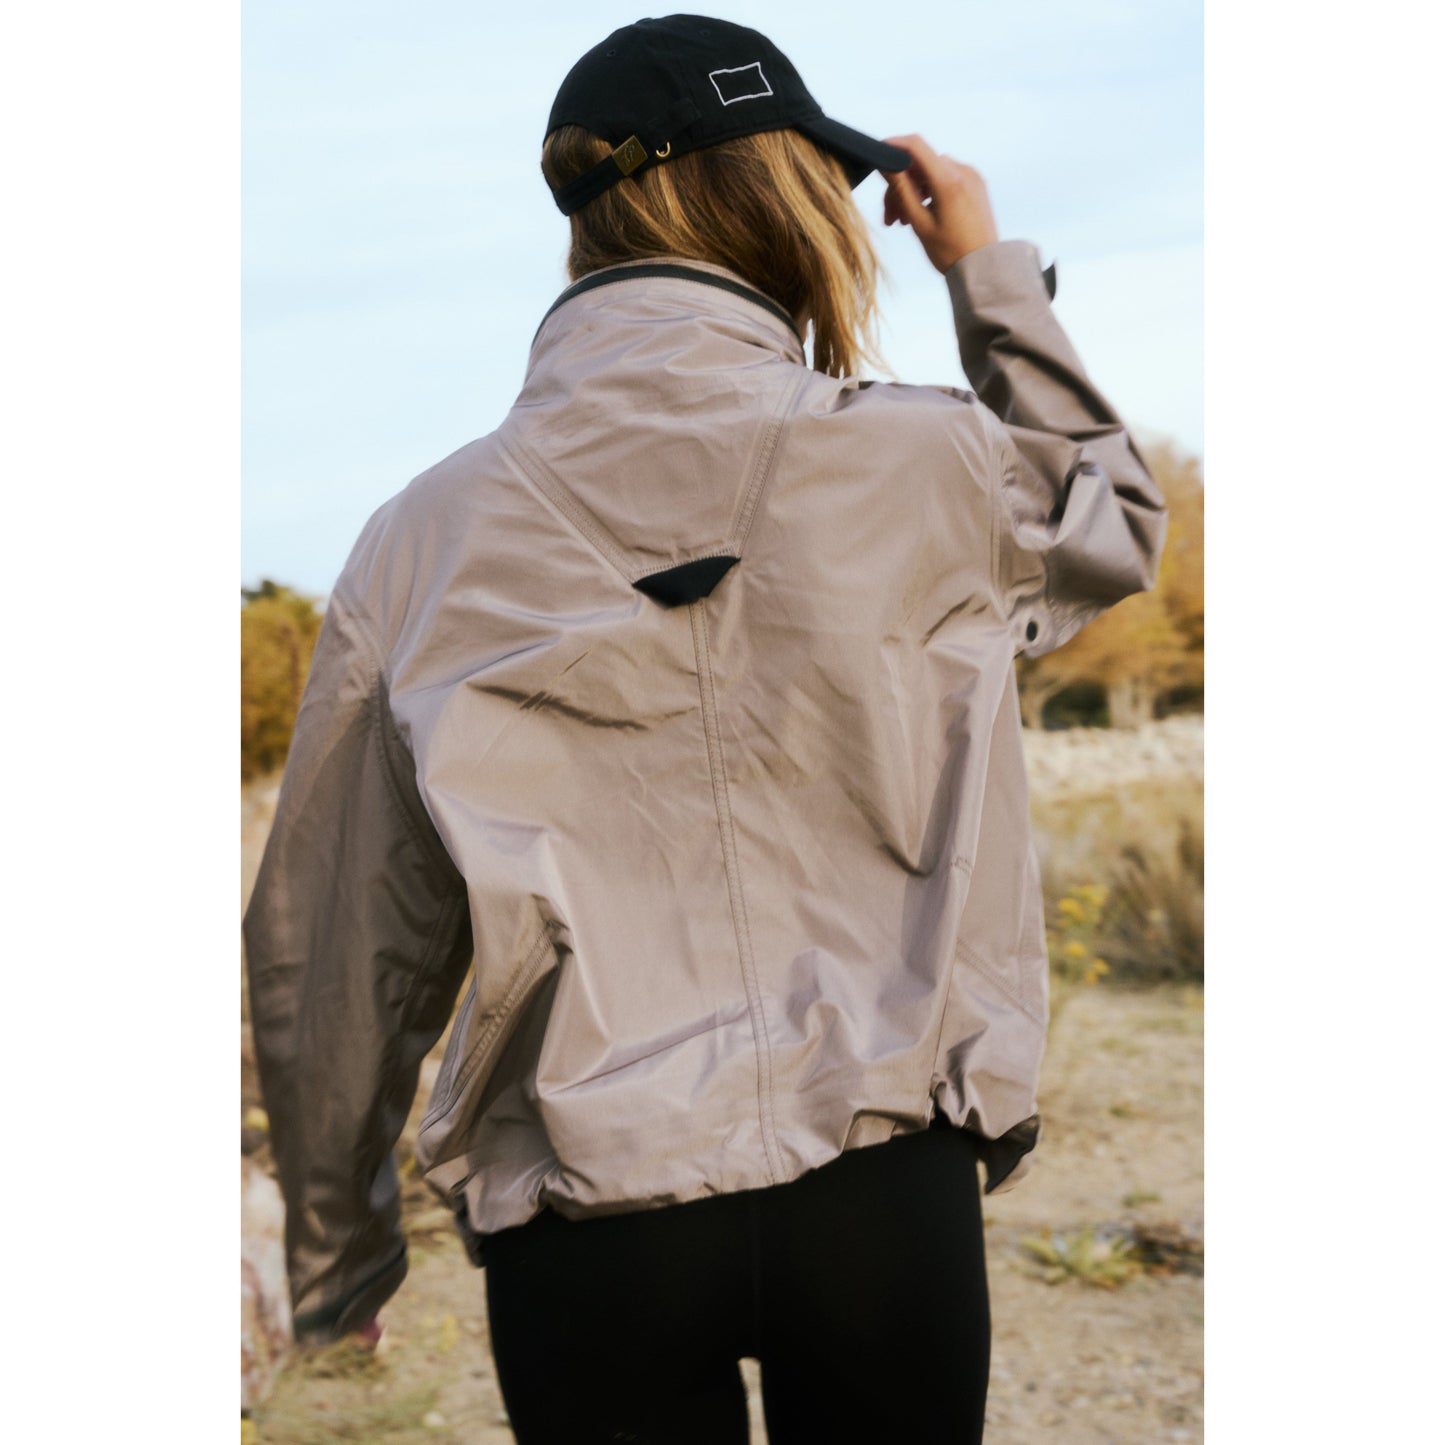 Woman from behind holding a black cap, wearing a Rain & Shine Jacket from Free People Movement, in a natural outdoor setting.